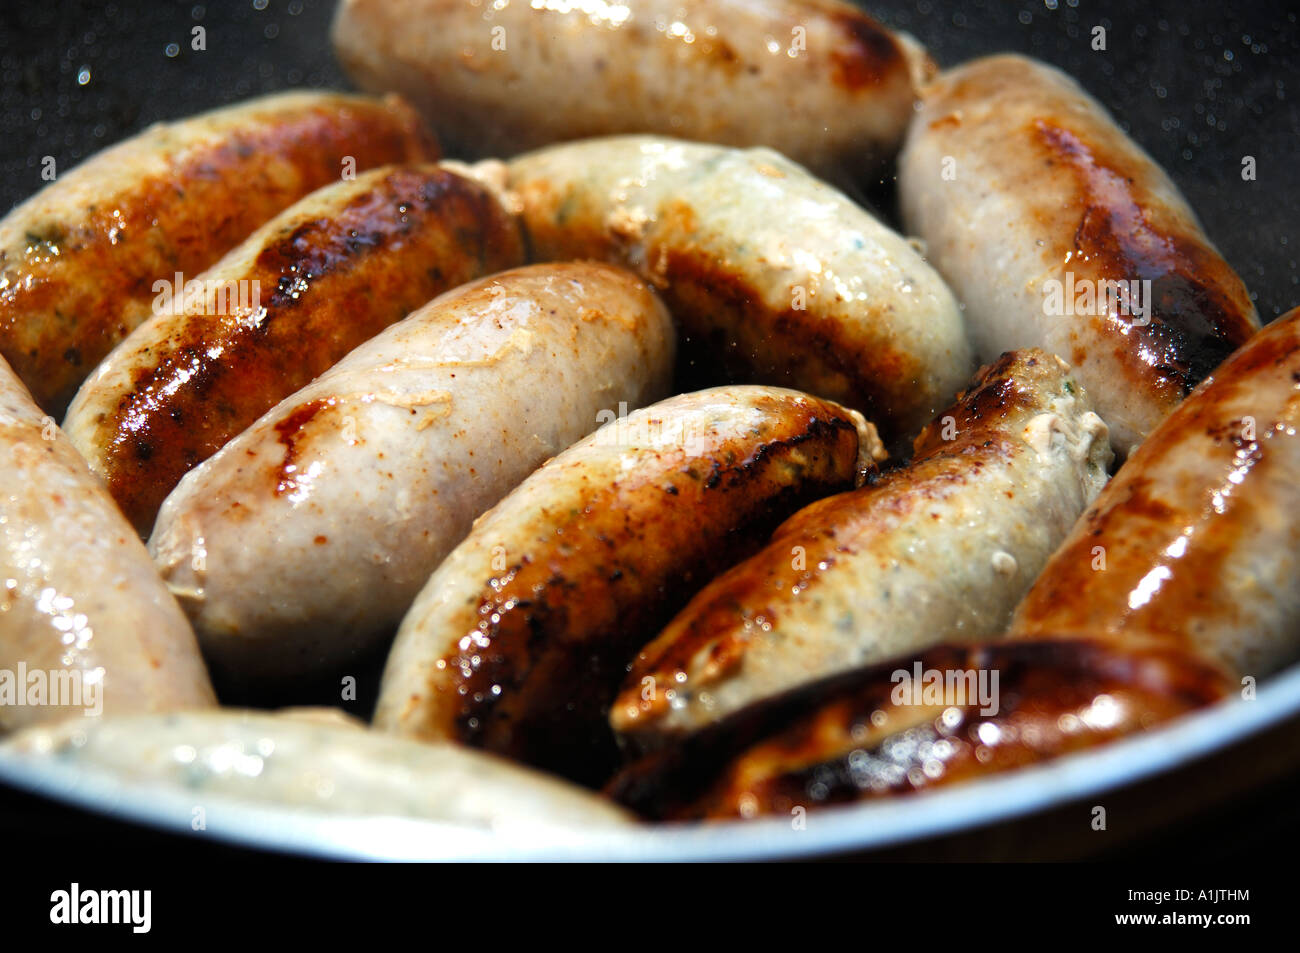 Thick pork sausages frying in a pan Stock Photo